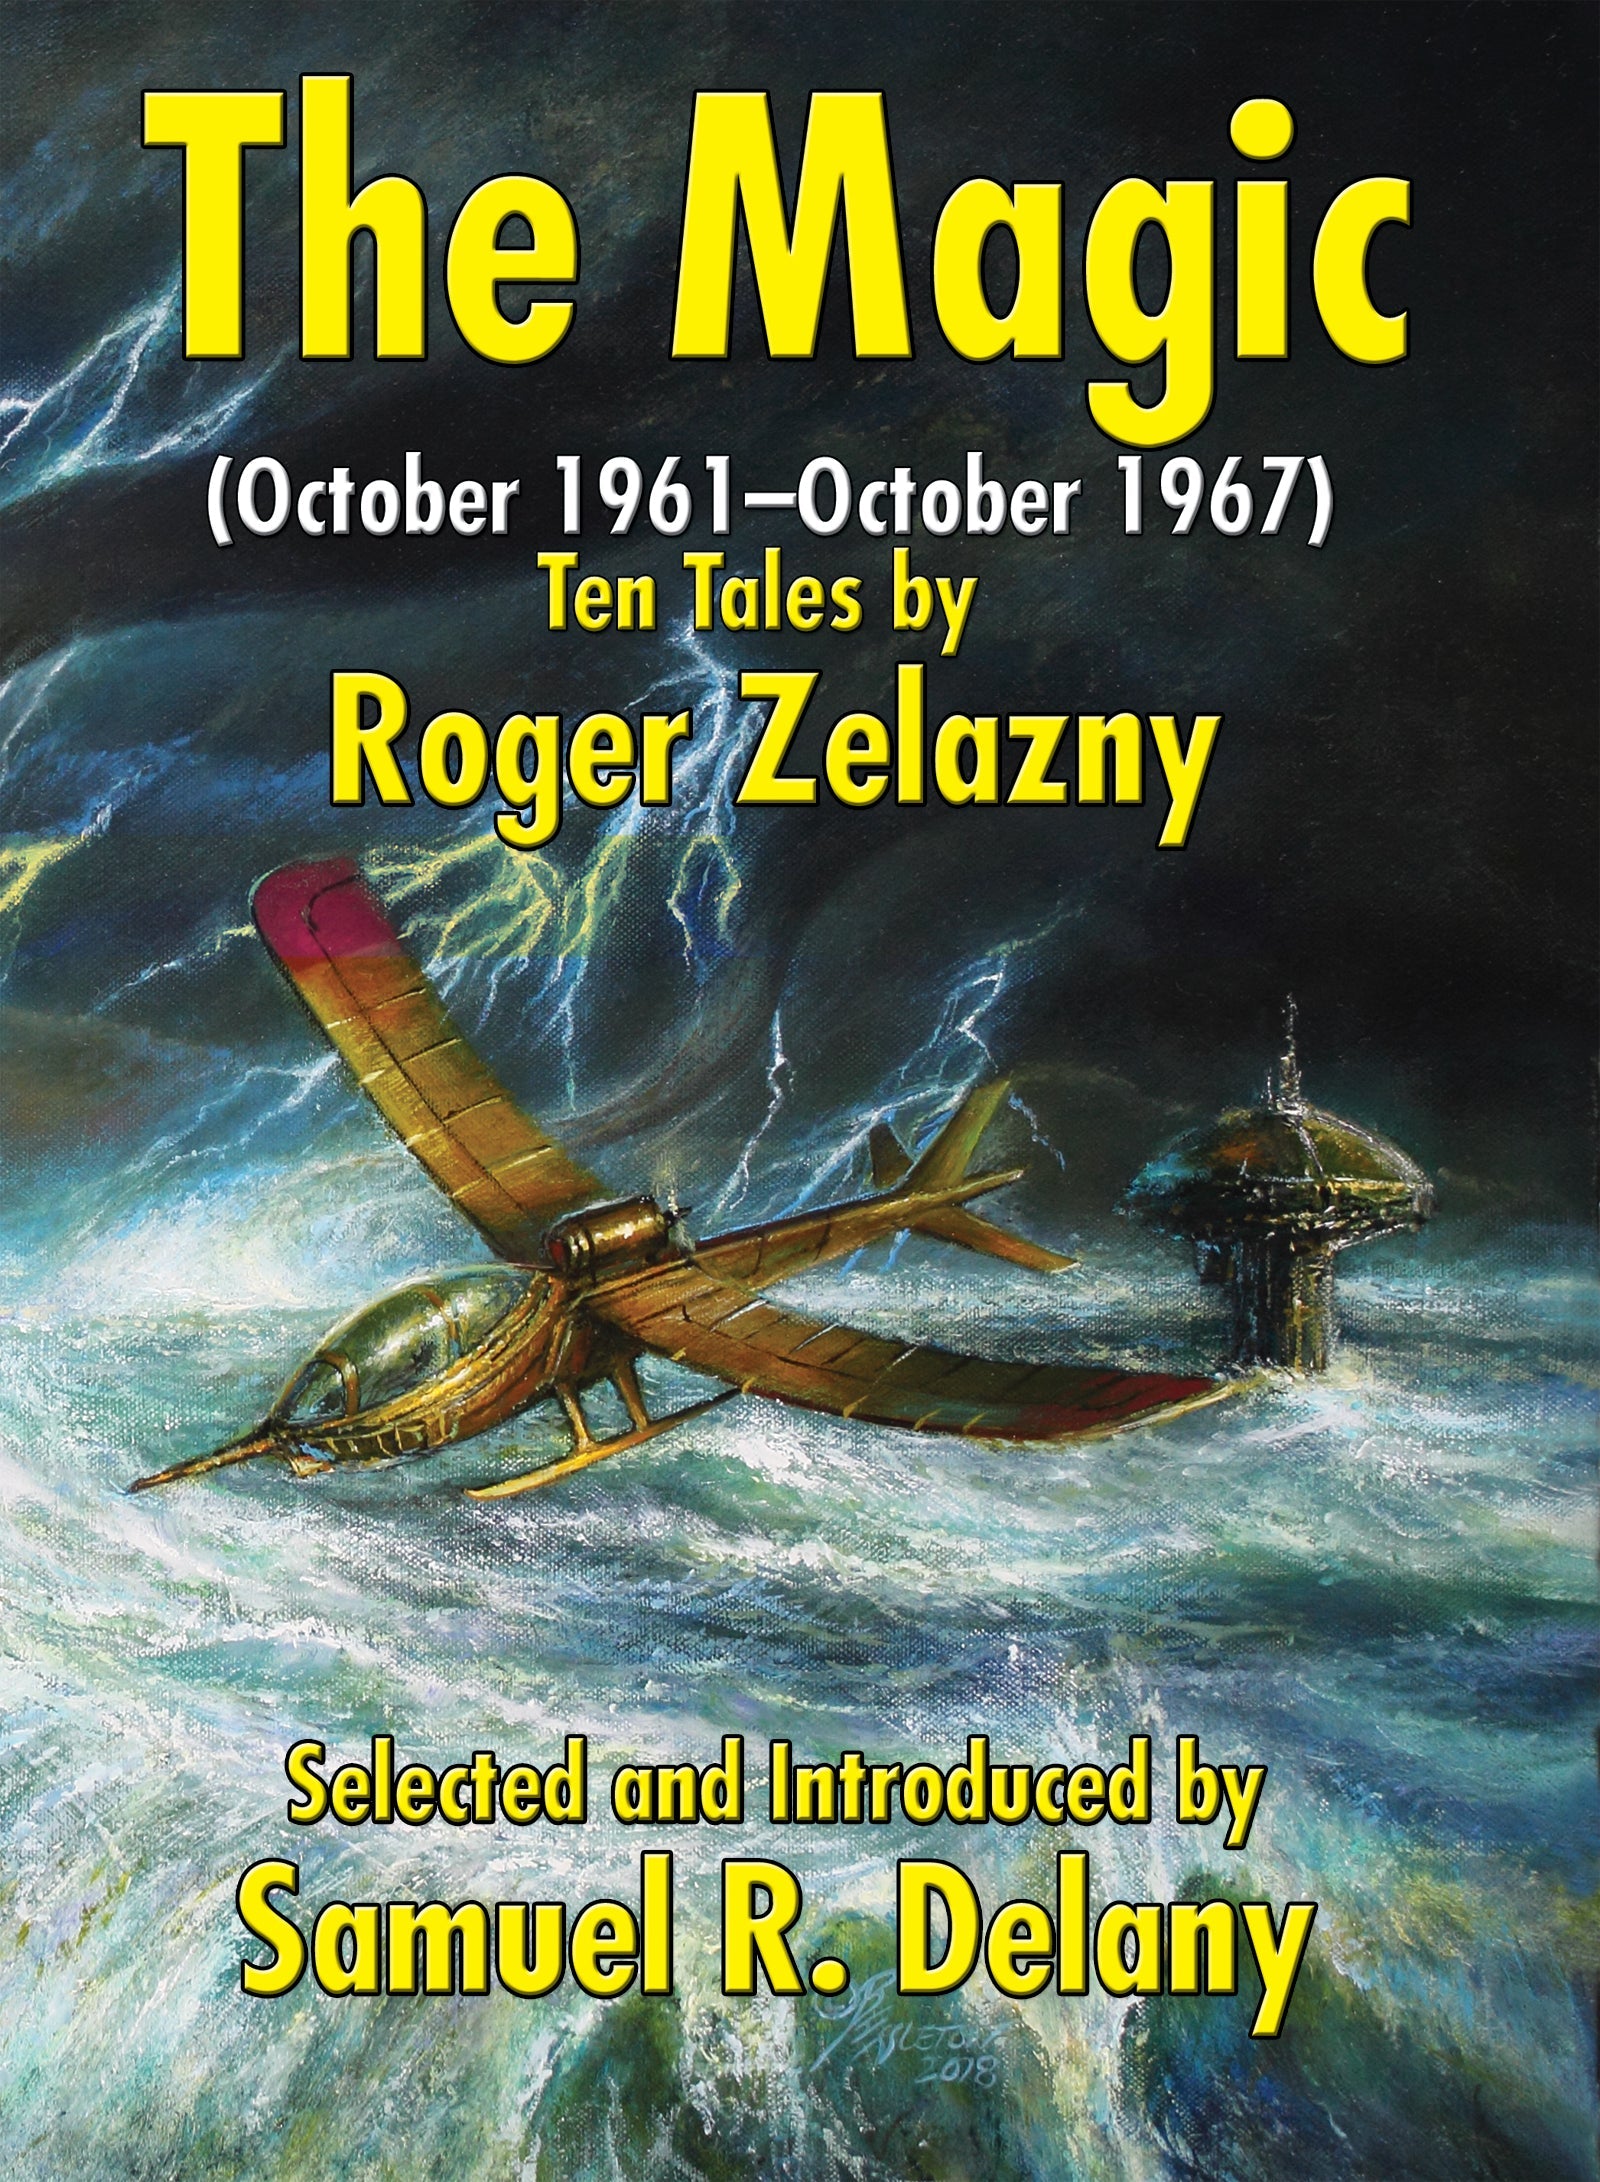 Cover art for The Magic.